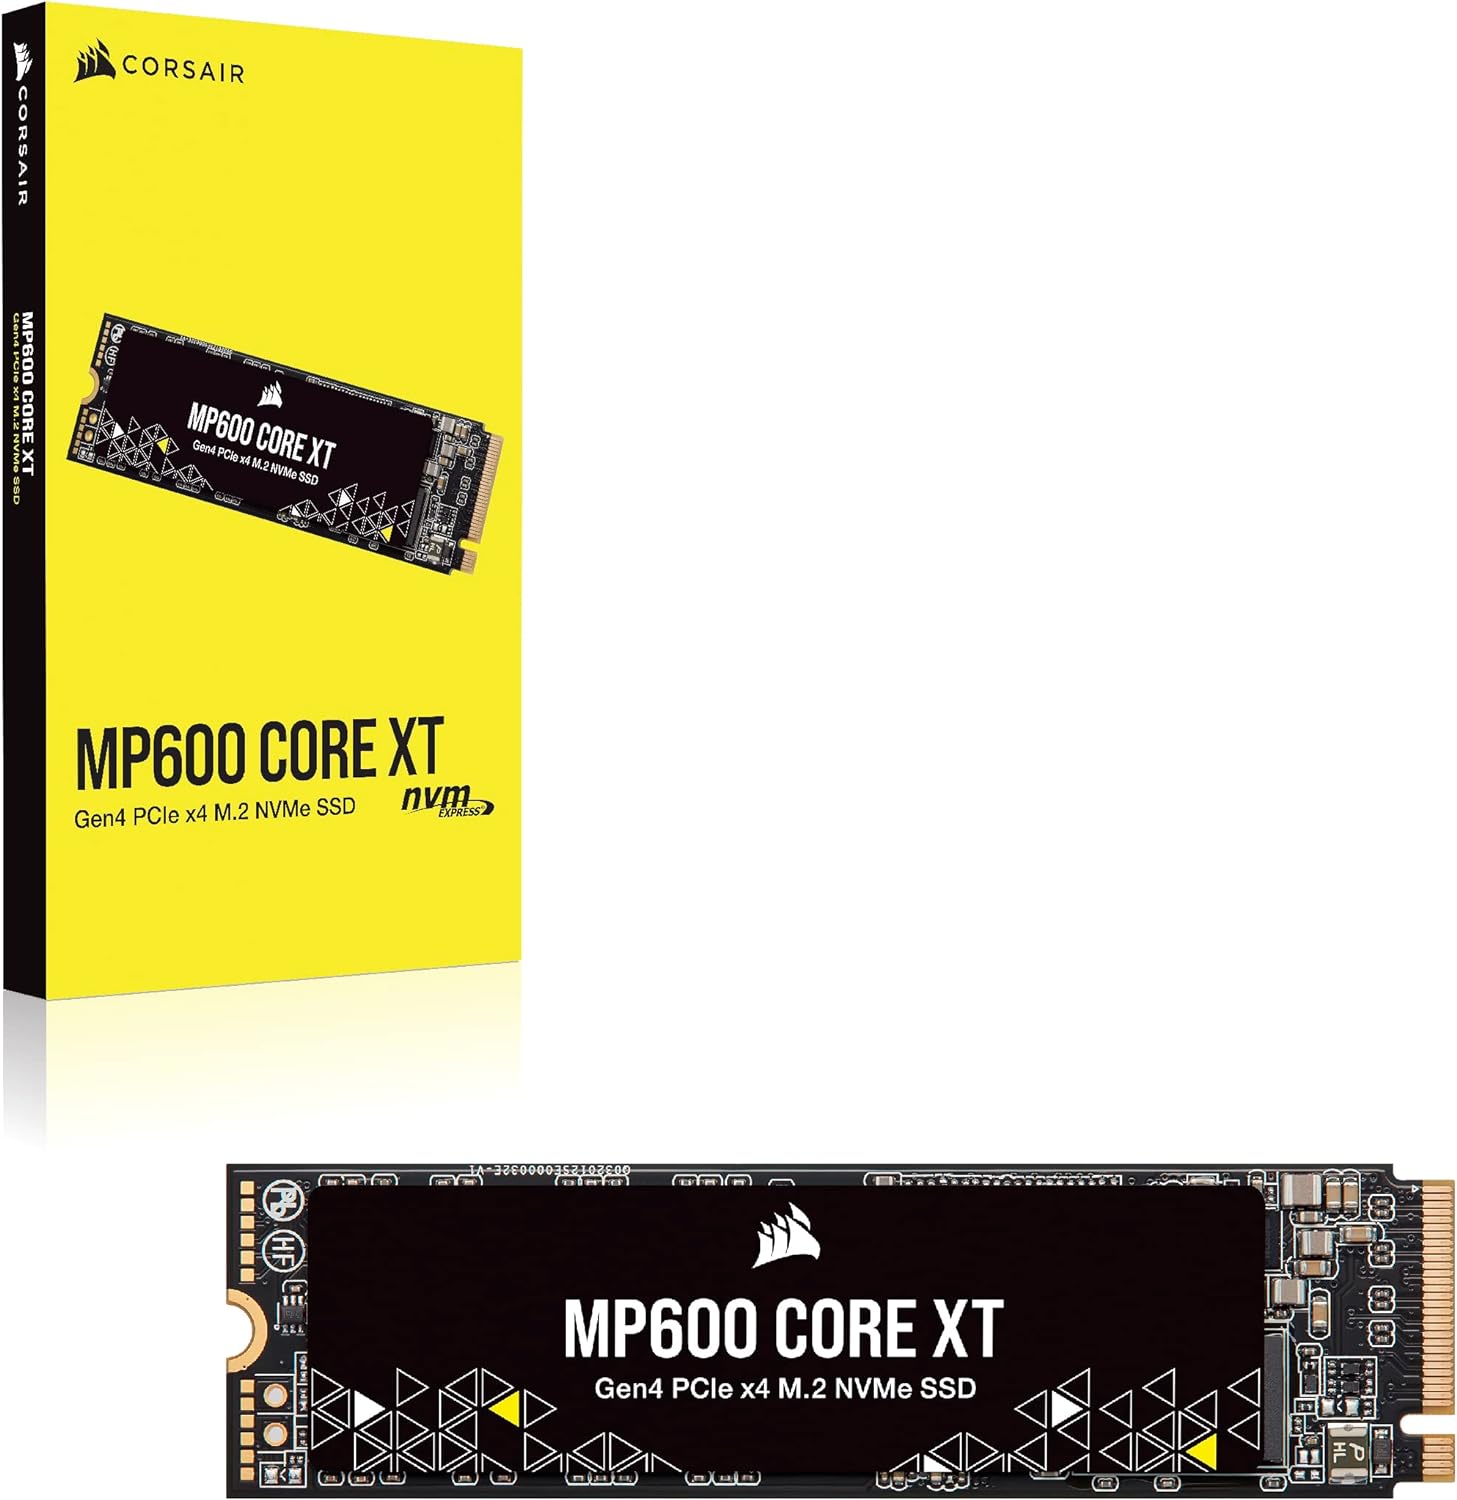 Corsair MP600 CORE XT 2TB PCIe Gen4 x4 NVMe M.2 SSD – High-Density QLC NAND – M.2 2280 – DirectStorage Compatible - Up to 5,000MB/sec – Great for PCIe 4.0 Notebooks and Desktops – Black